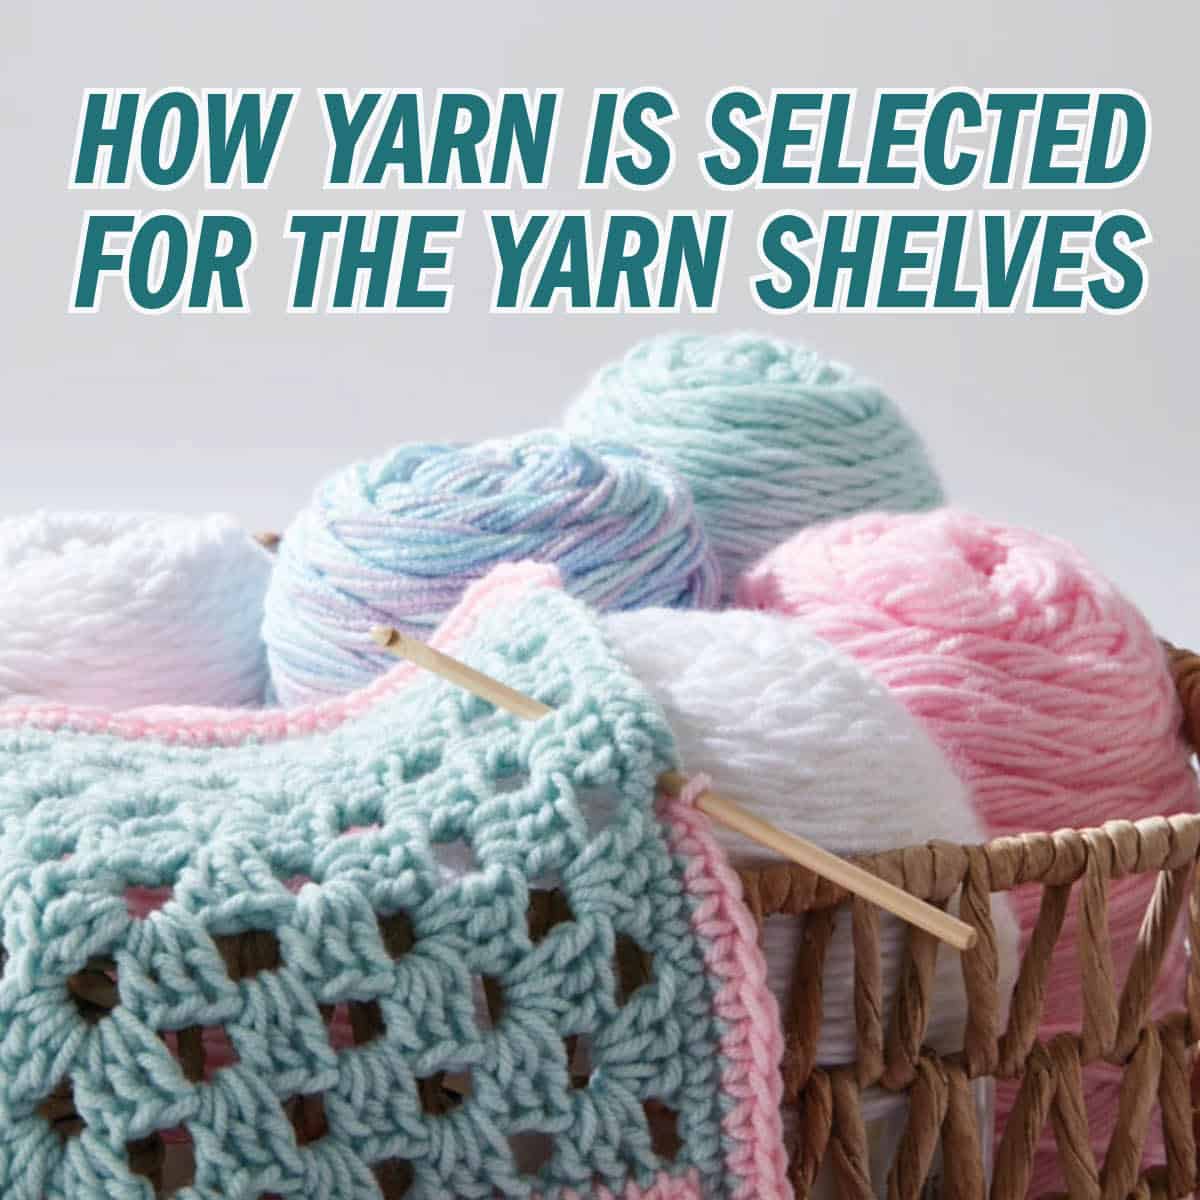 10 Steps - How Yarns are Selected for Yarn Stores and Yarn Shelves Near You